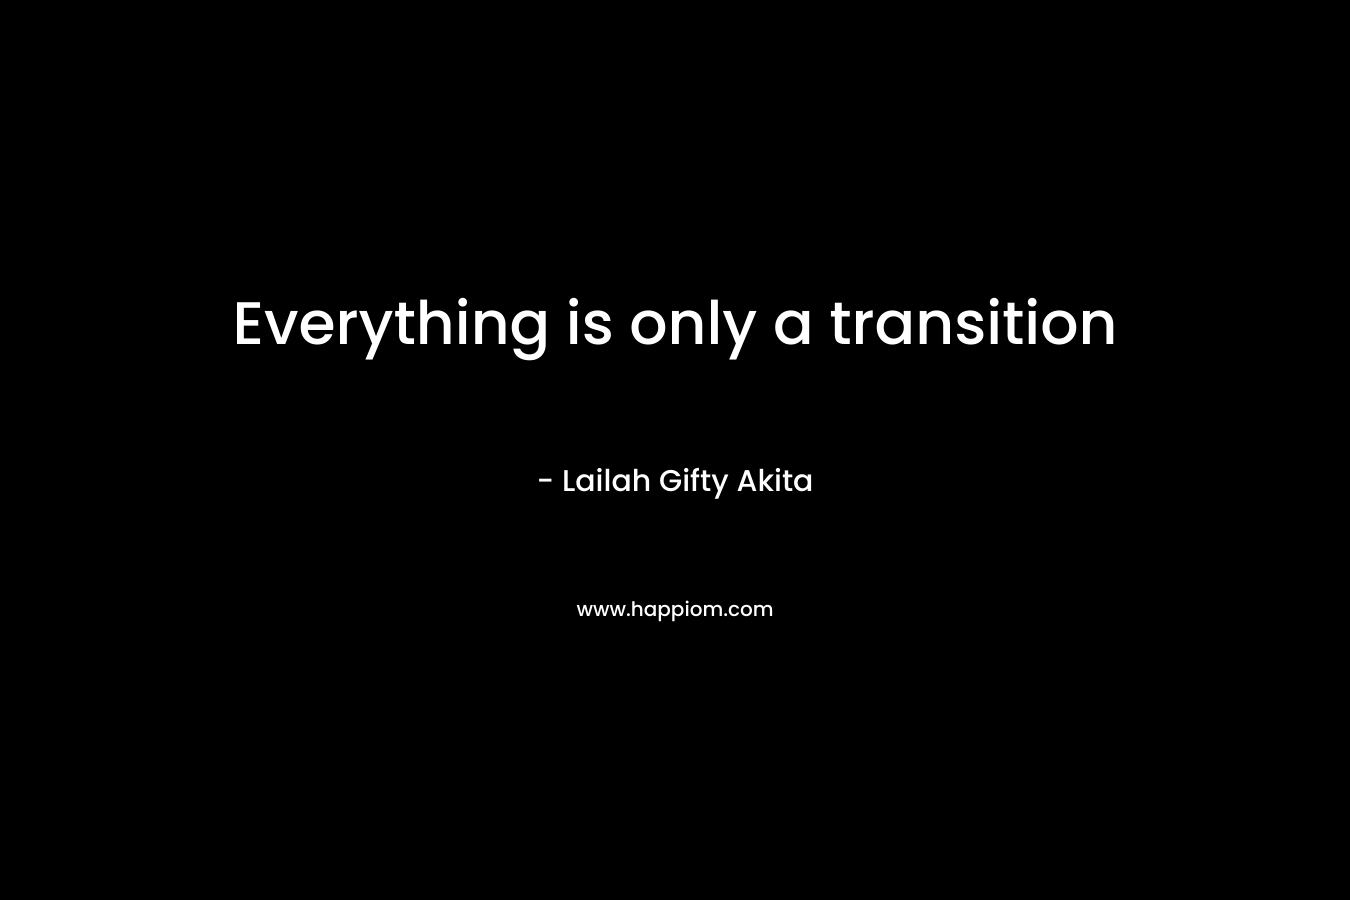 Everything is only a transition